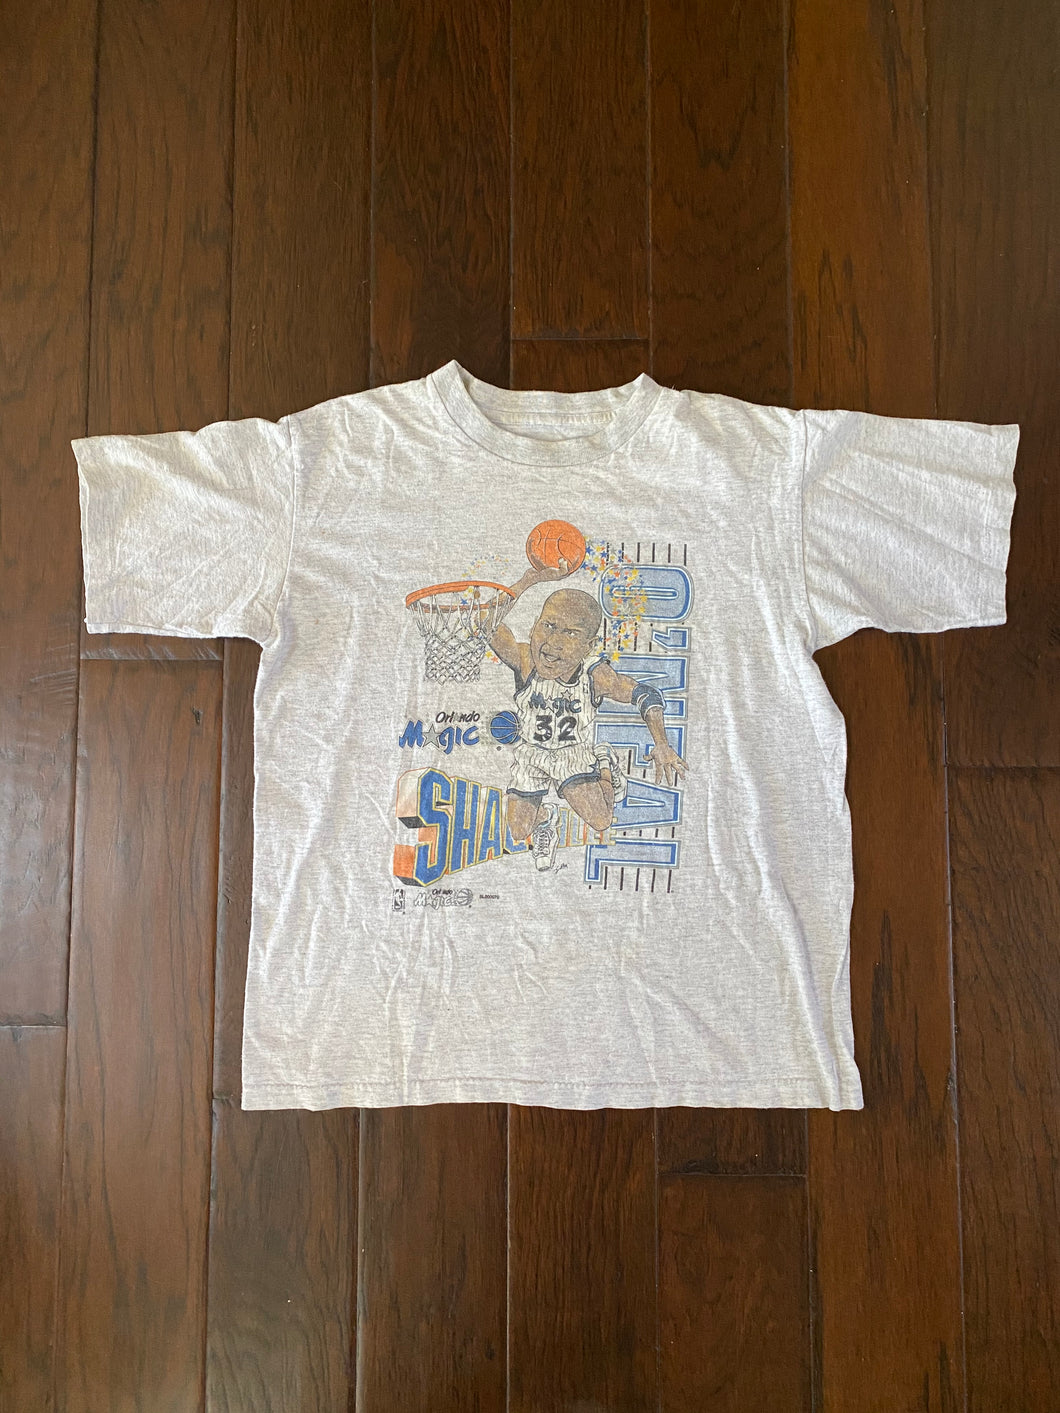 Orlando Magic Shaquille O’Neal 1990’s Vintage Distressed T-shirt